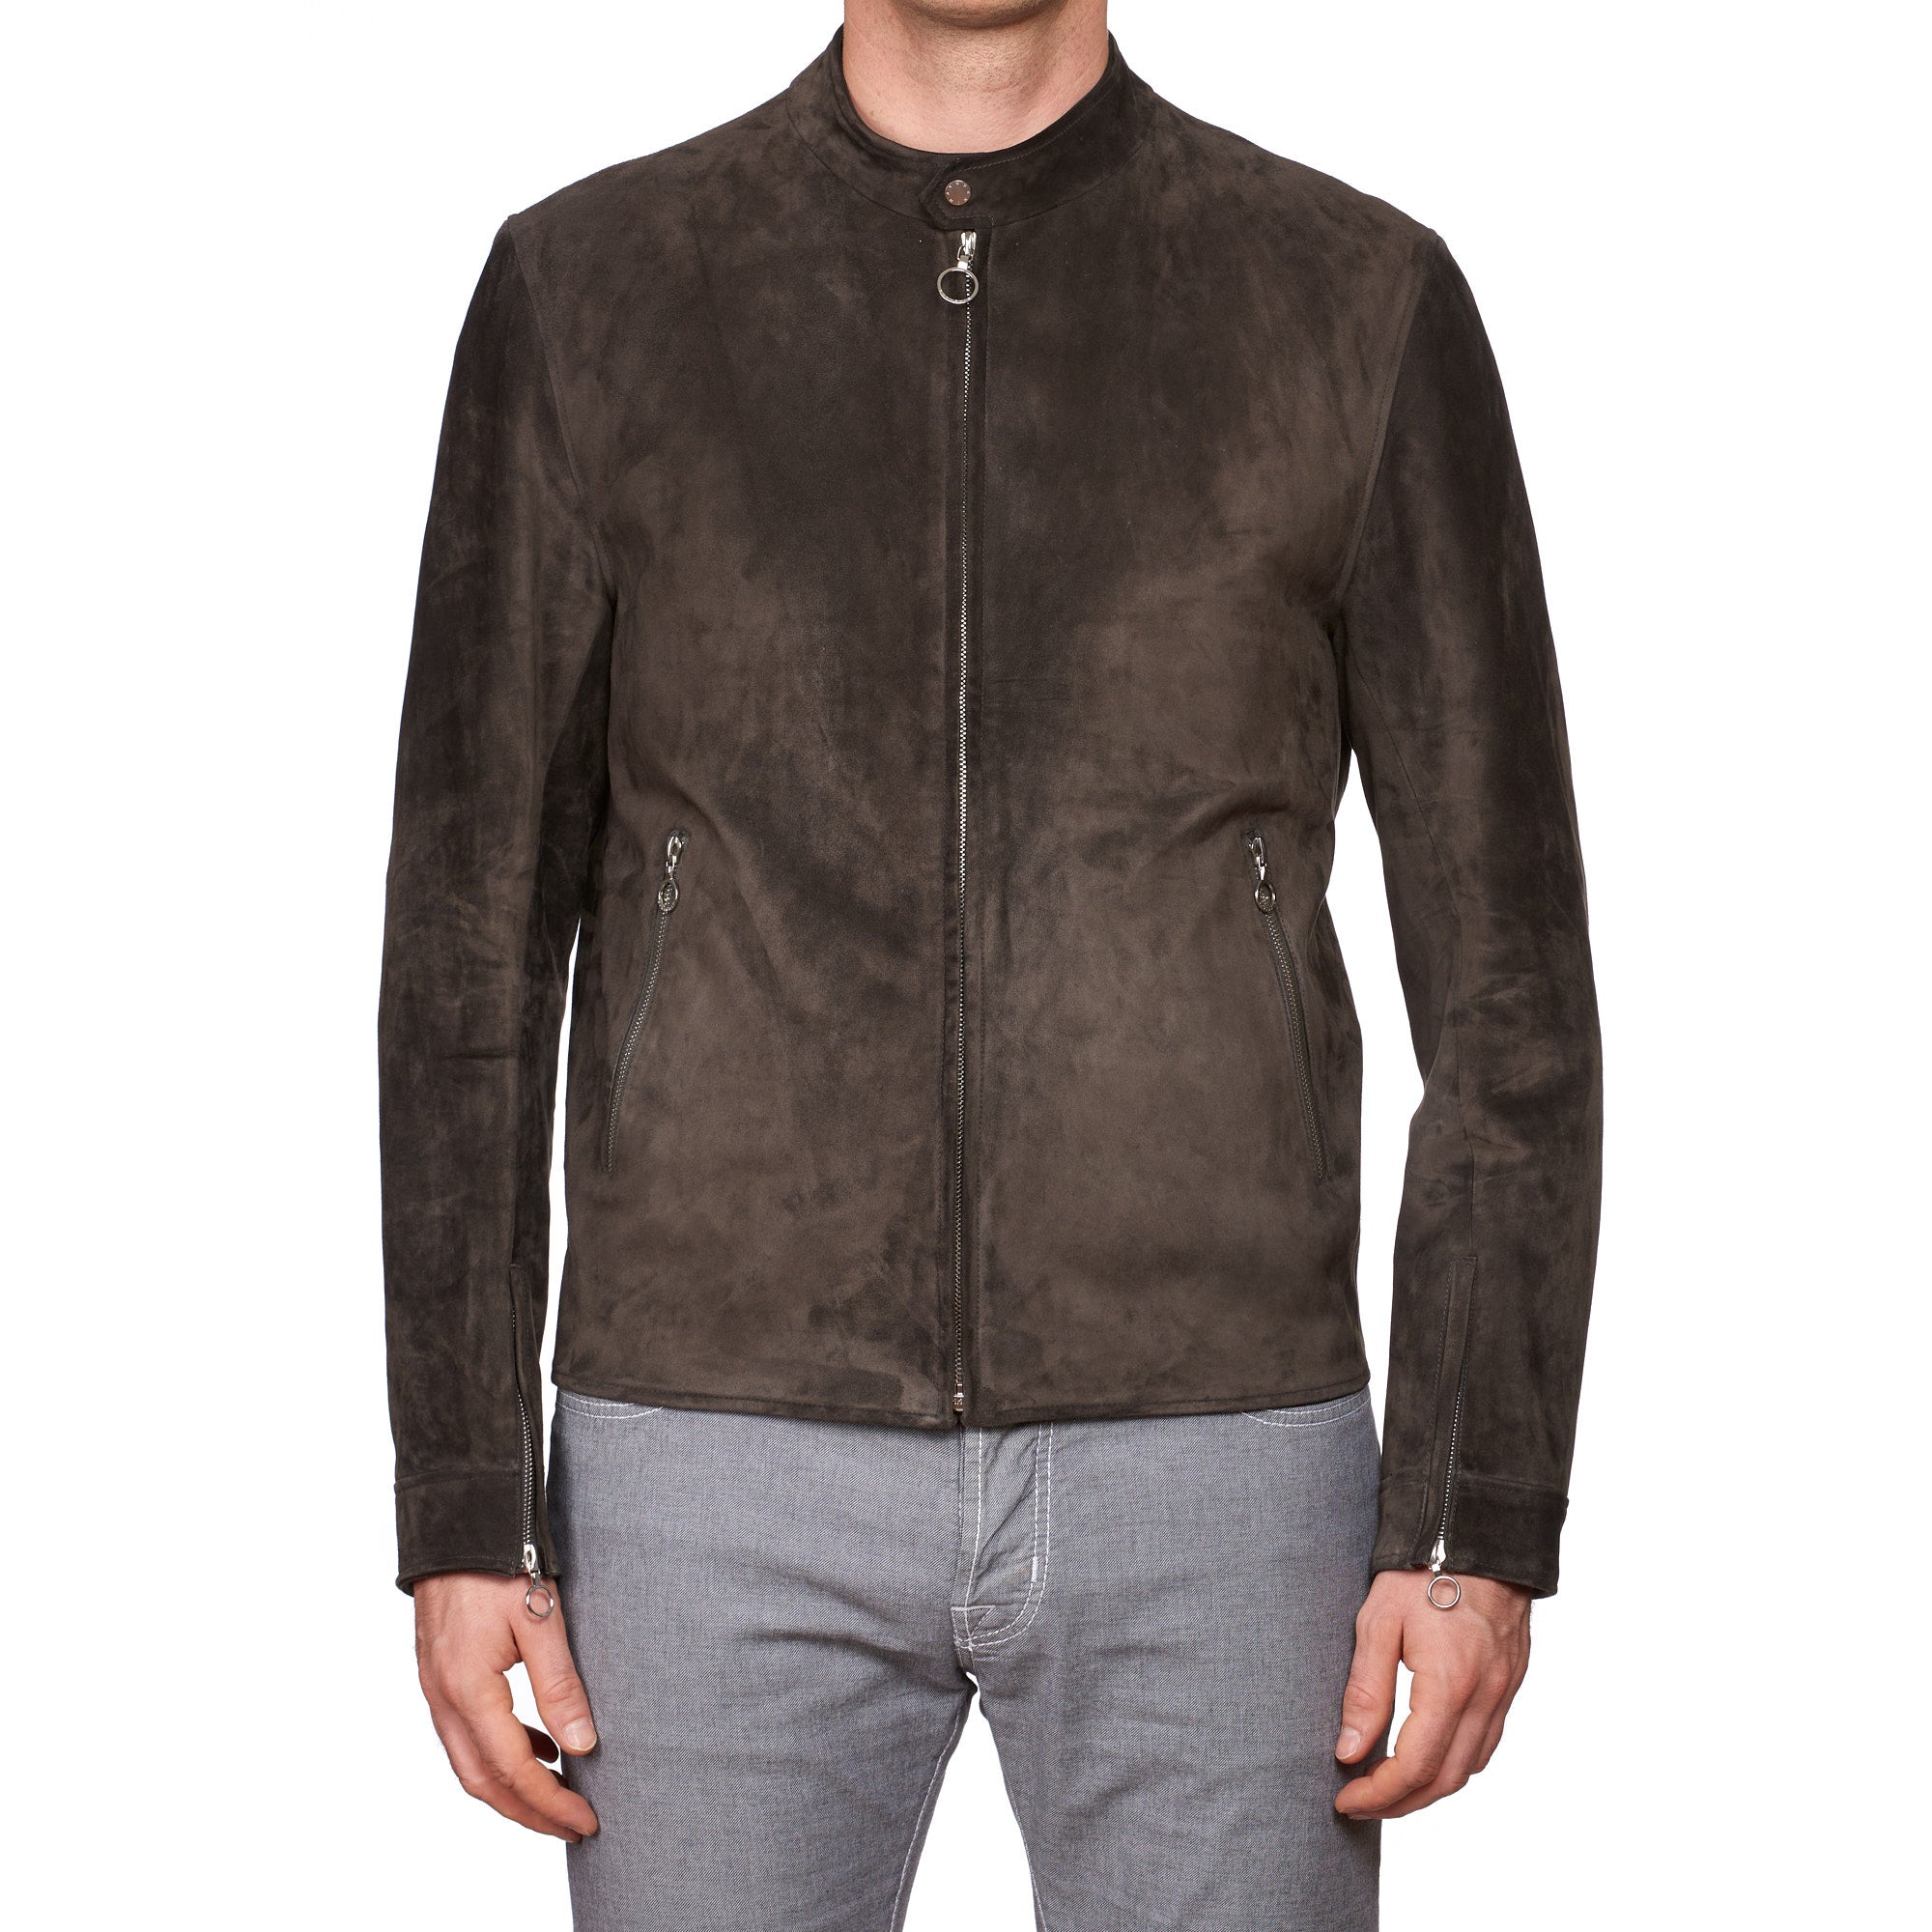 SERAPHIN Slate Brown Suede Calf Leather Unlined Cafe Racer Biker Jacket FR 50 NEW US M SERAPHIN